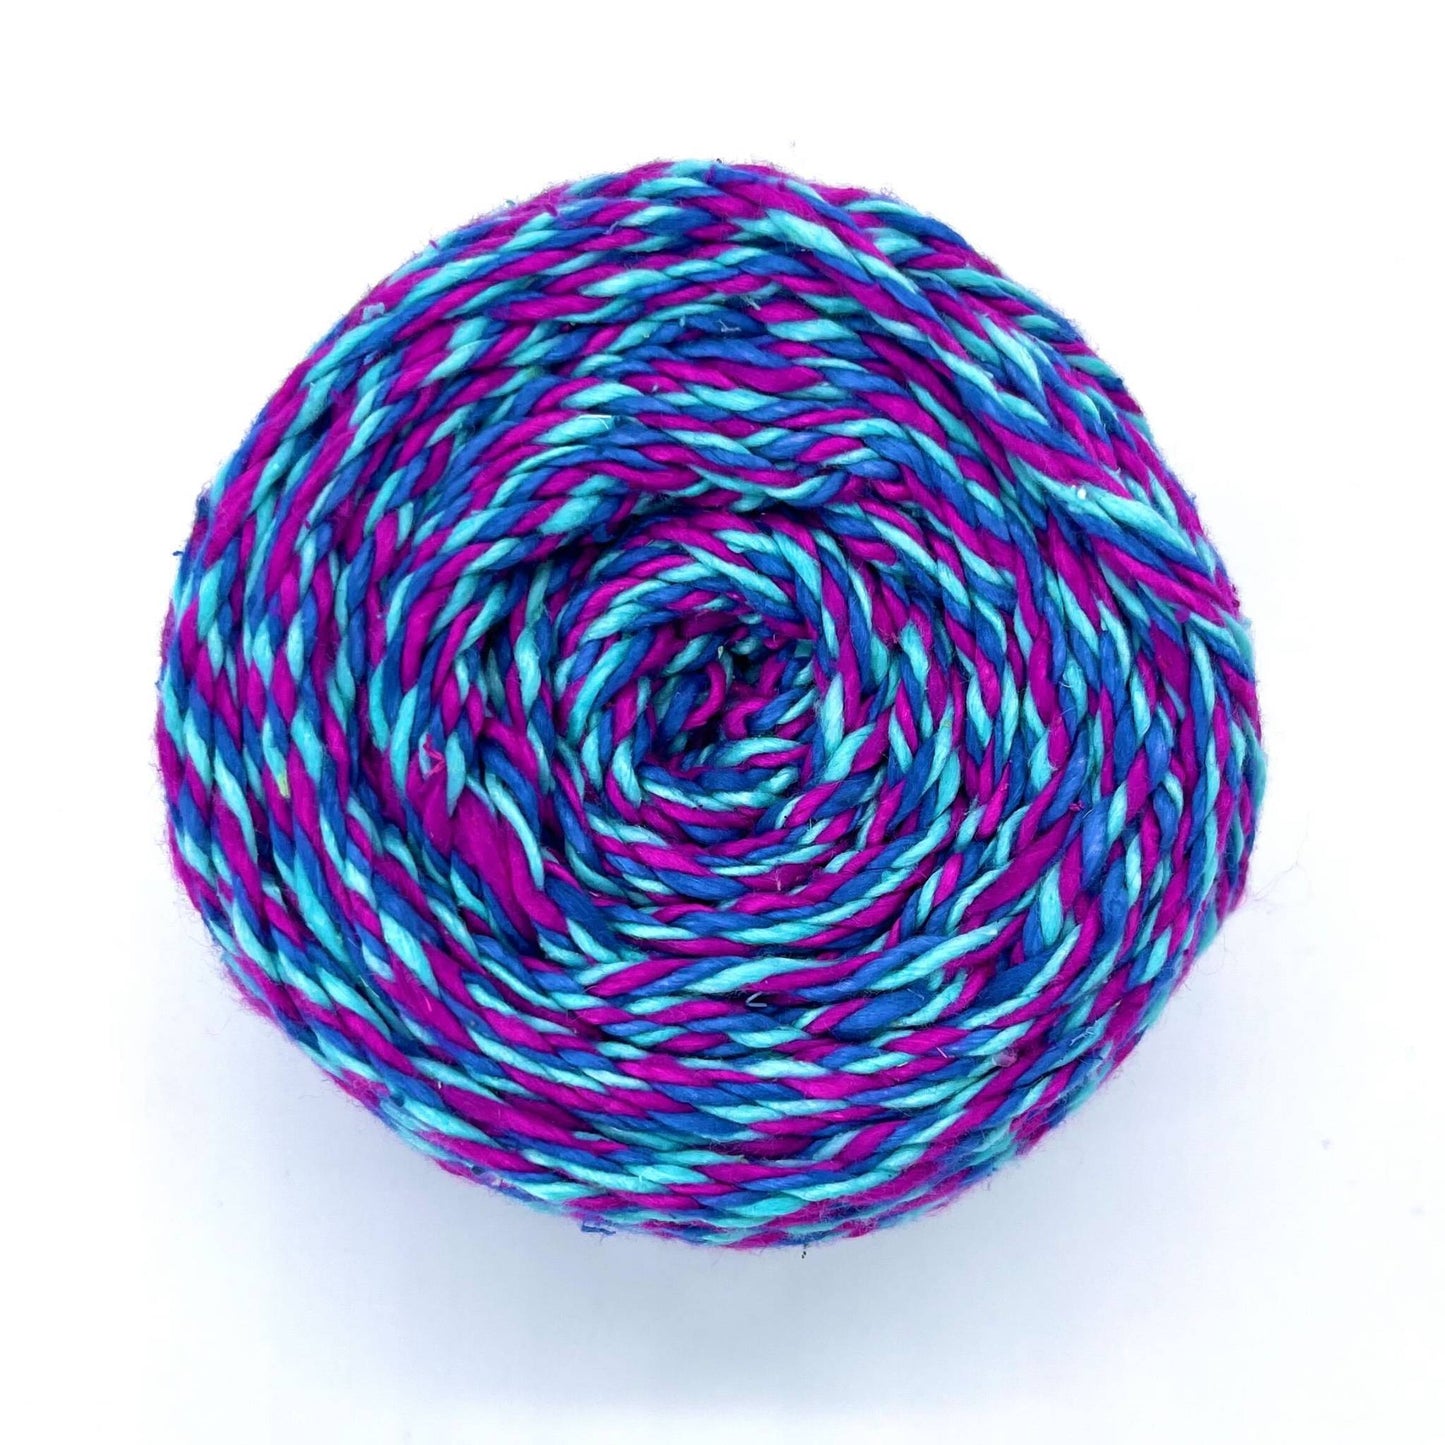 A skein of reclaimed silk yarn on a white background. The yarn is a triple ply yarn with pink, turquoise and navy colors.